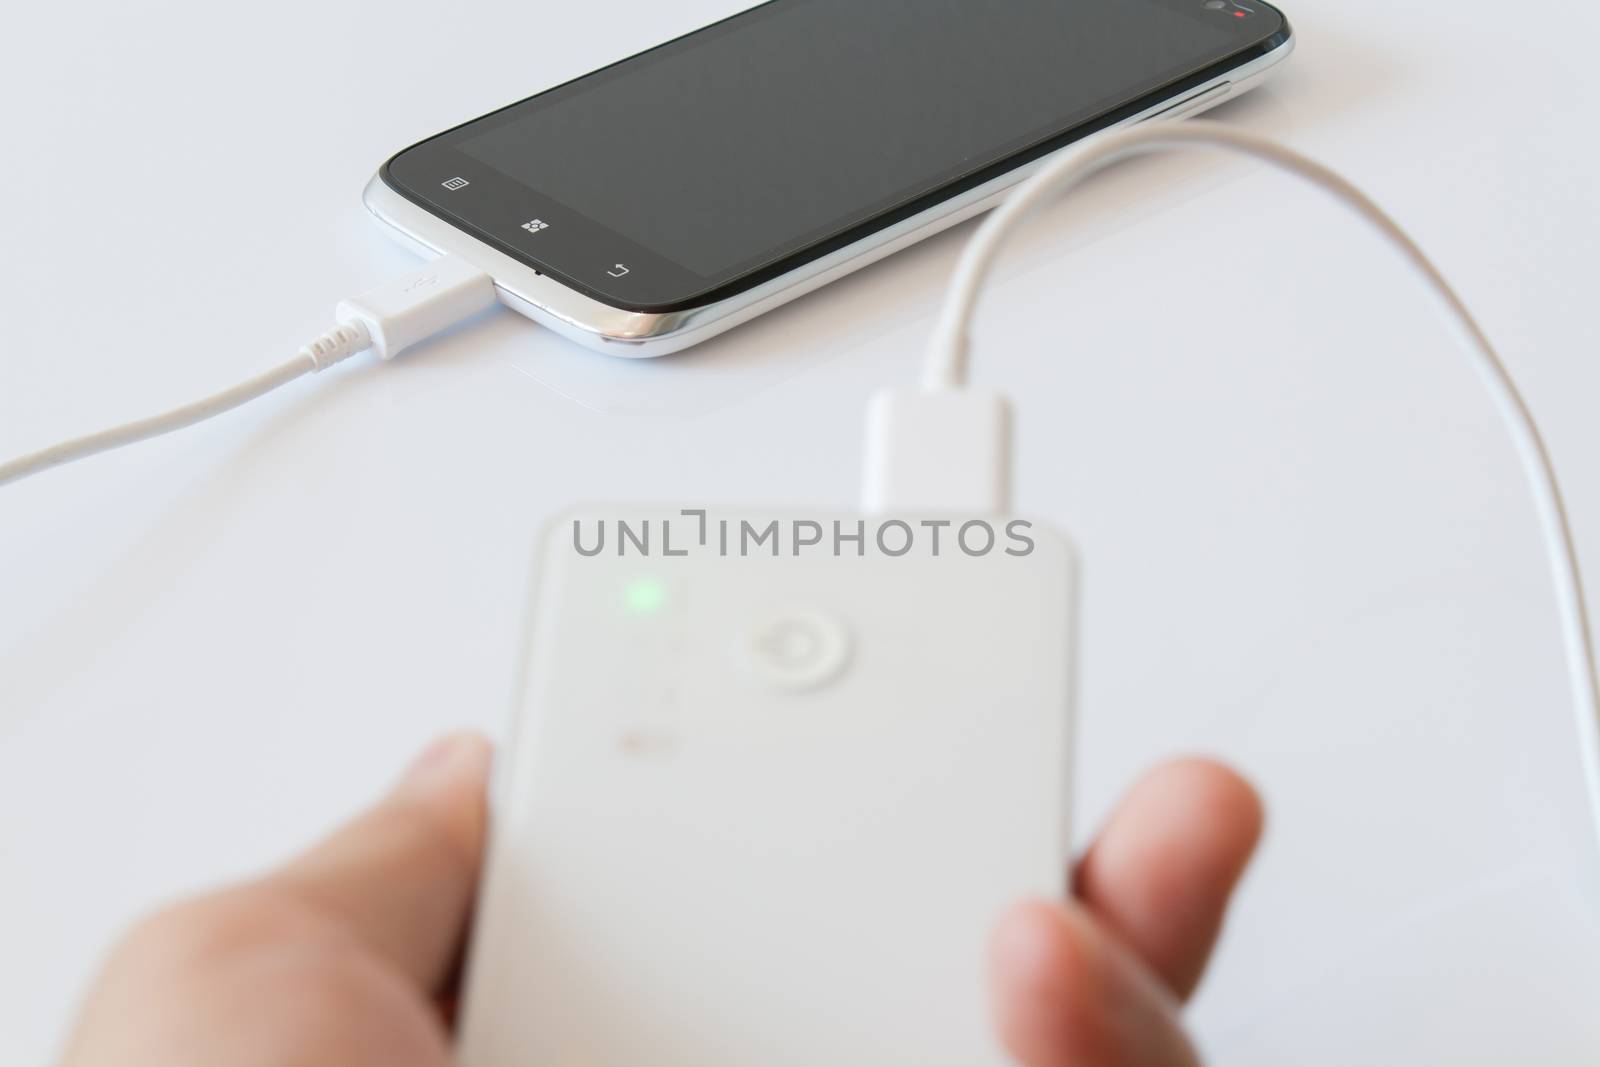 Smartphone is charging with power bank while it standby